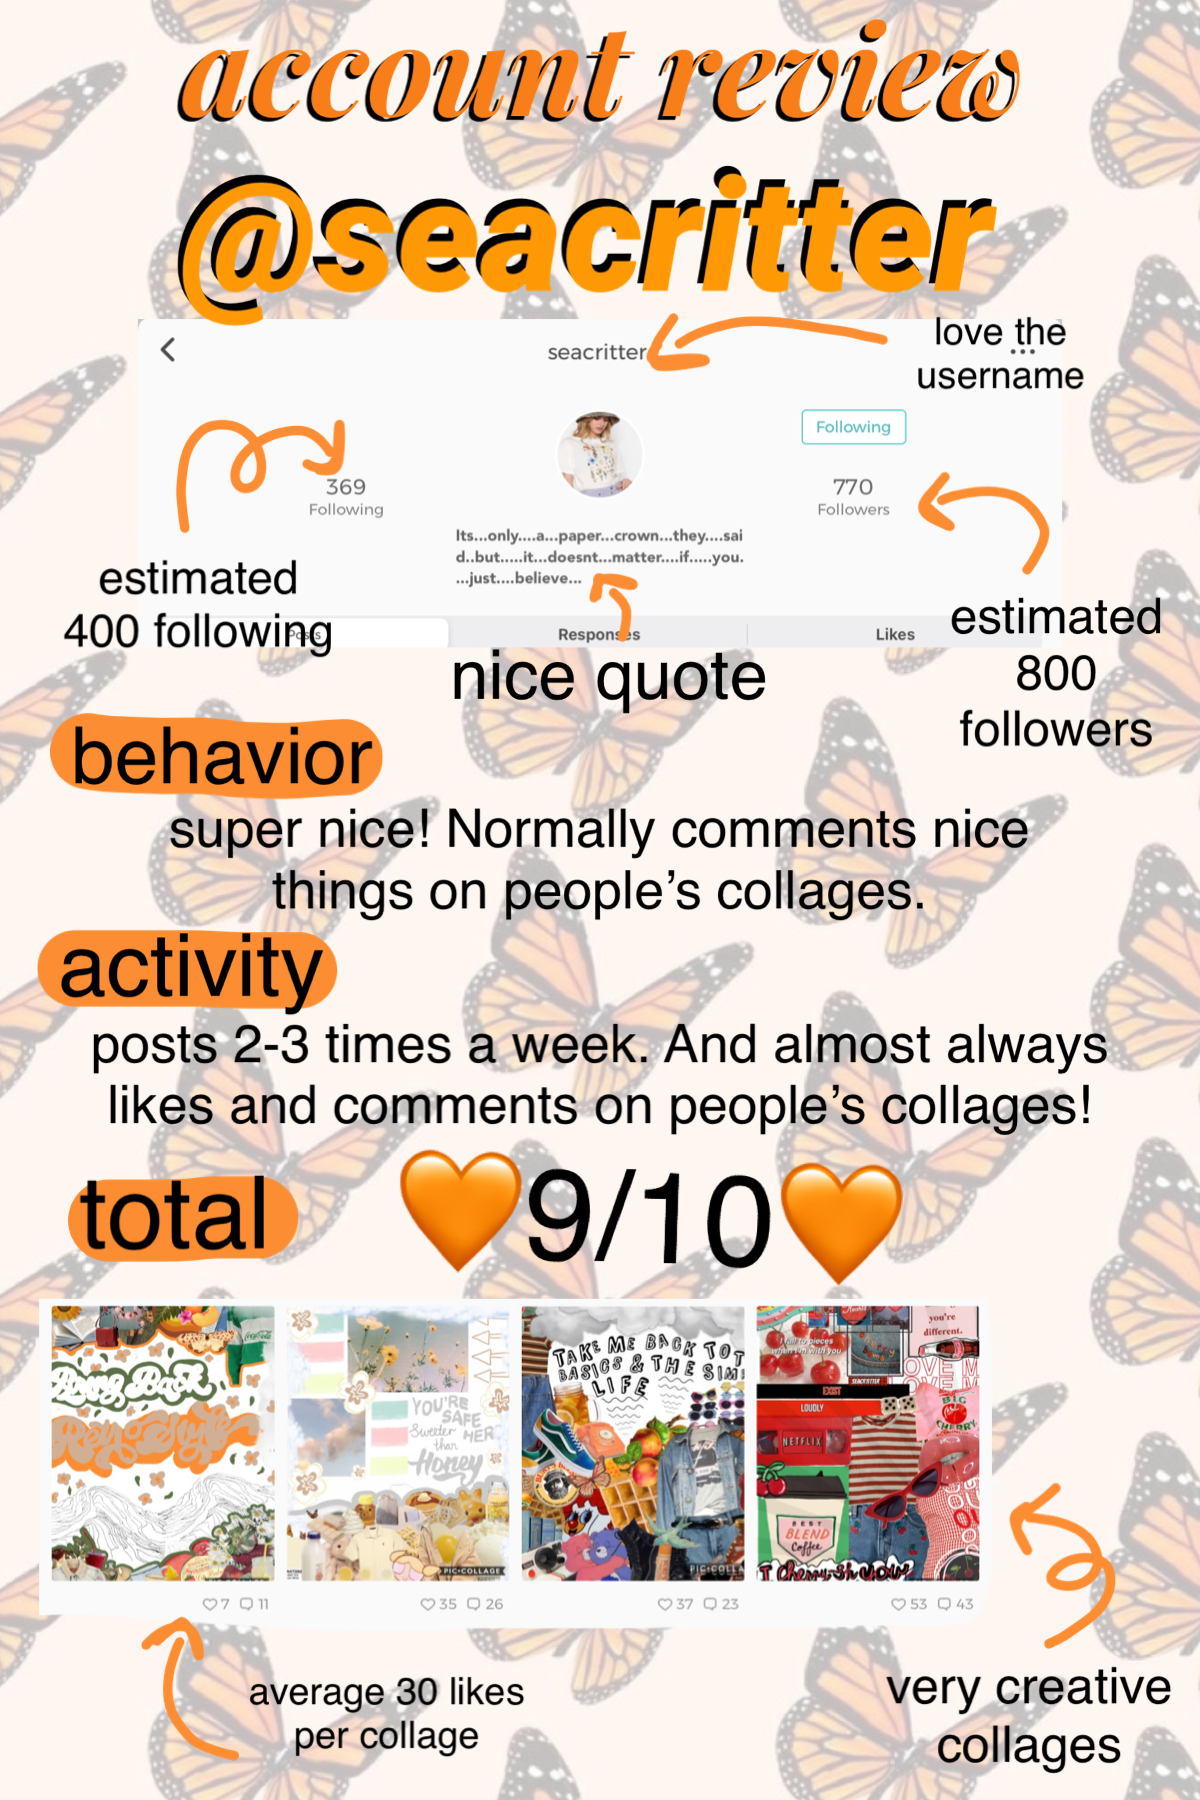 account review for @seacritter! Congrats on getting 9/10 on my account review! Ur such a good friend!🧡